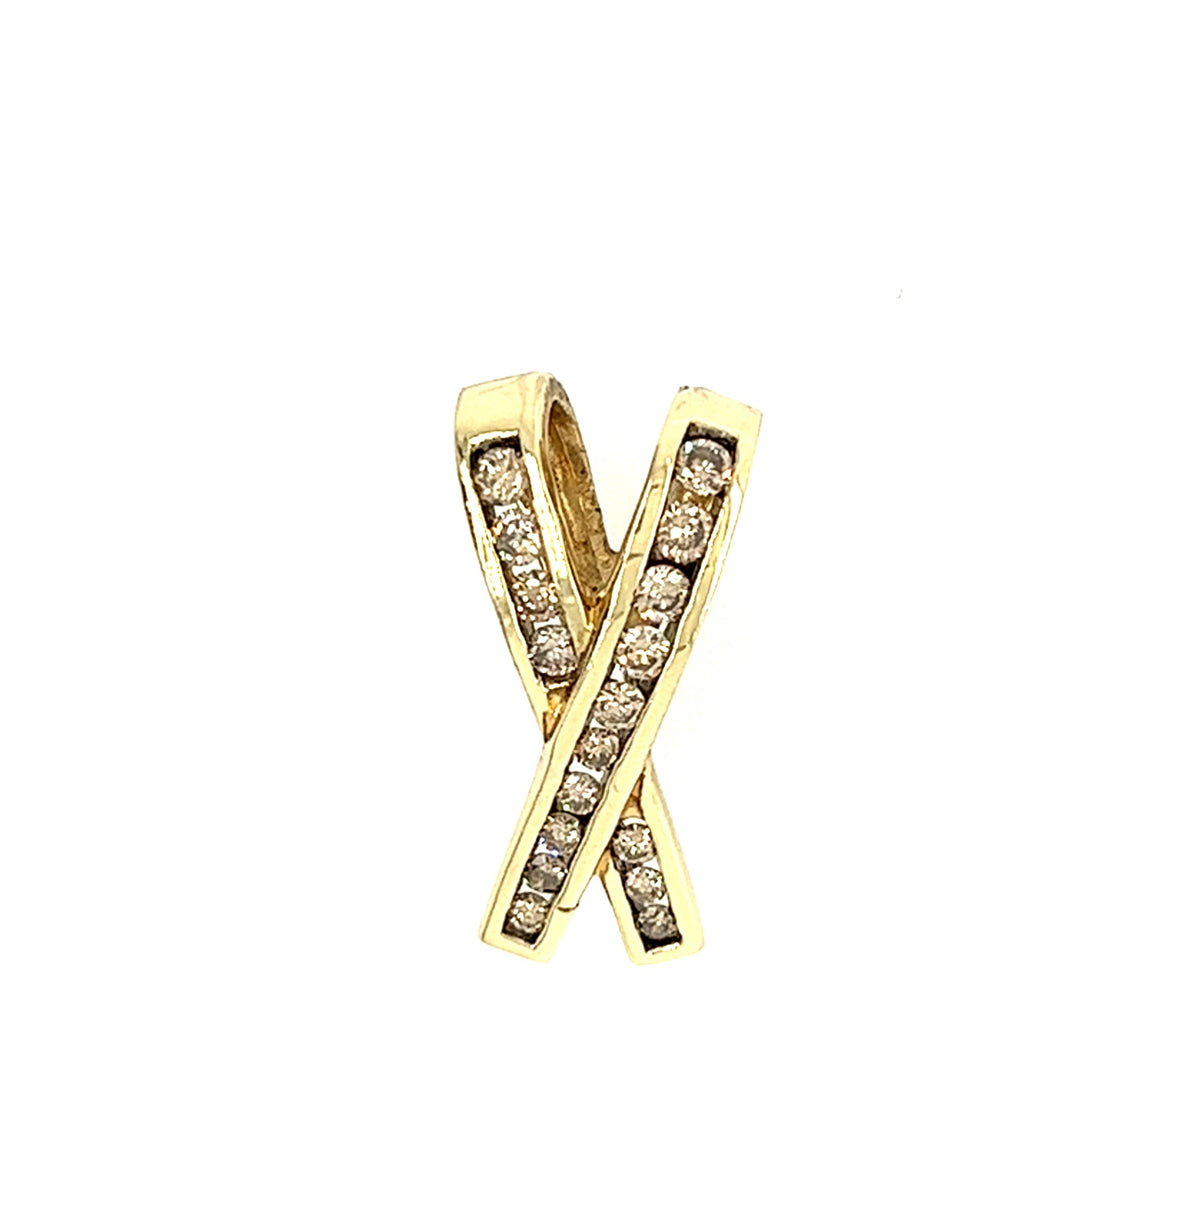 14KT YELLOW GOLD CHANNEL OF DIAMONDS PENDANT